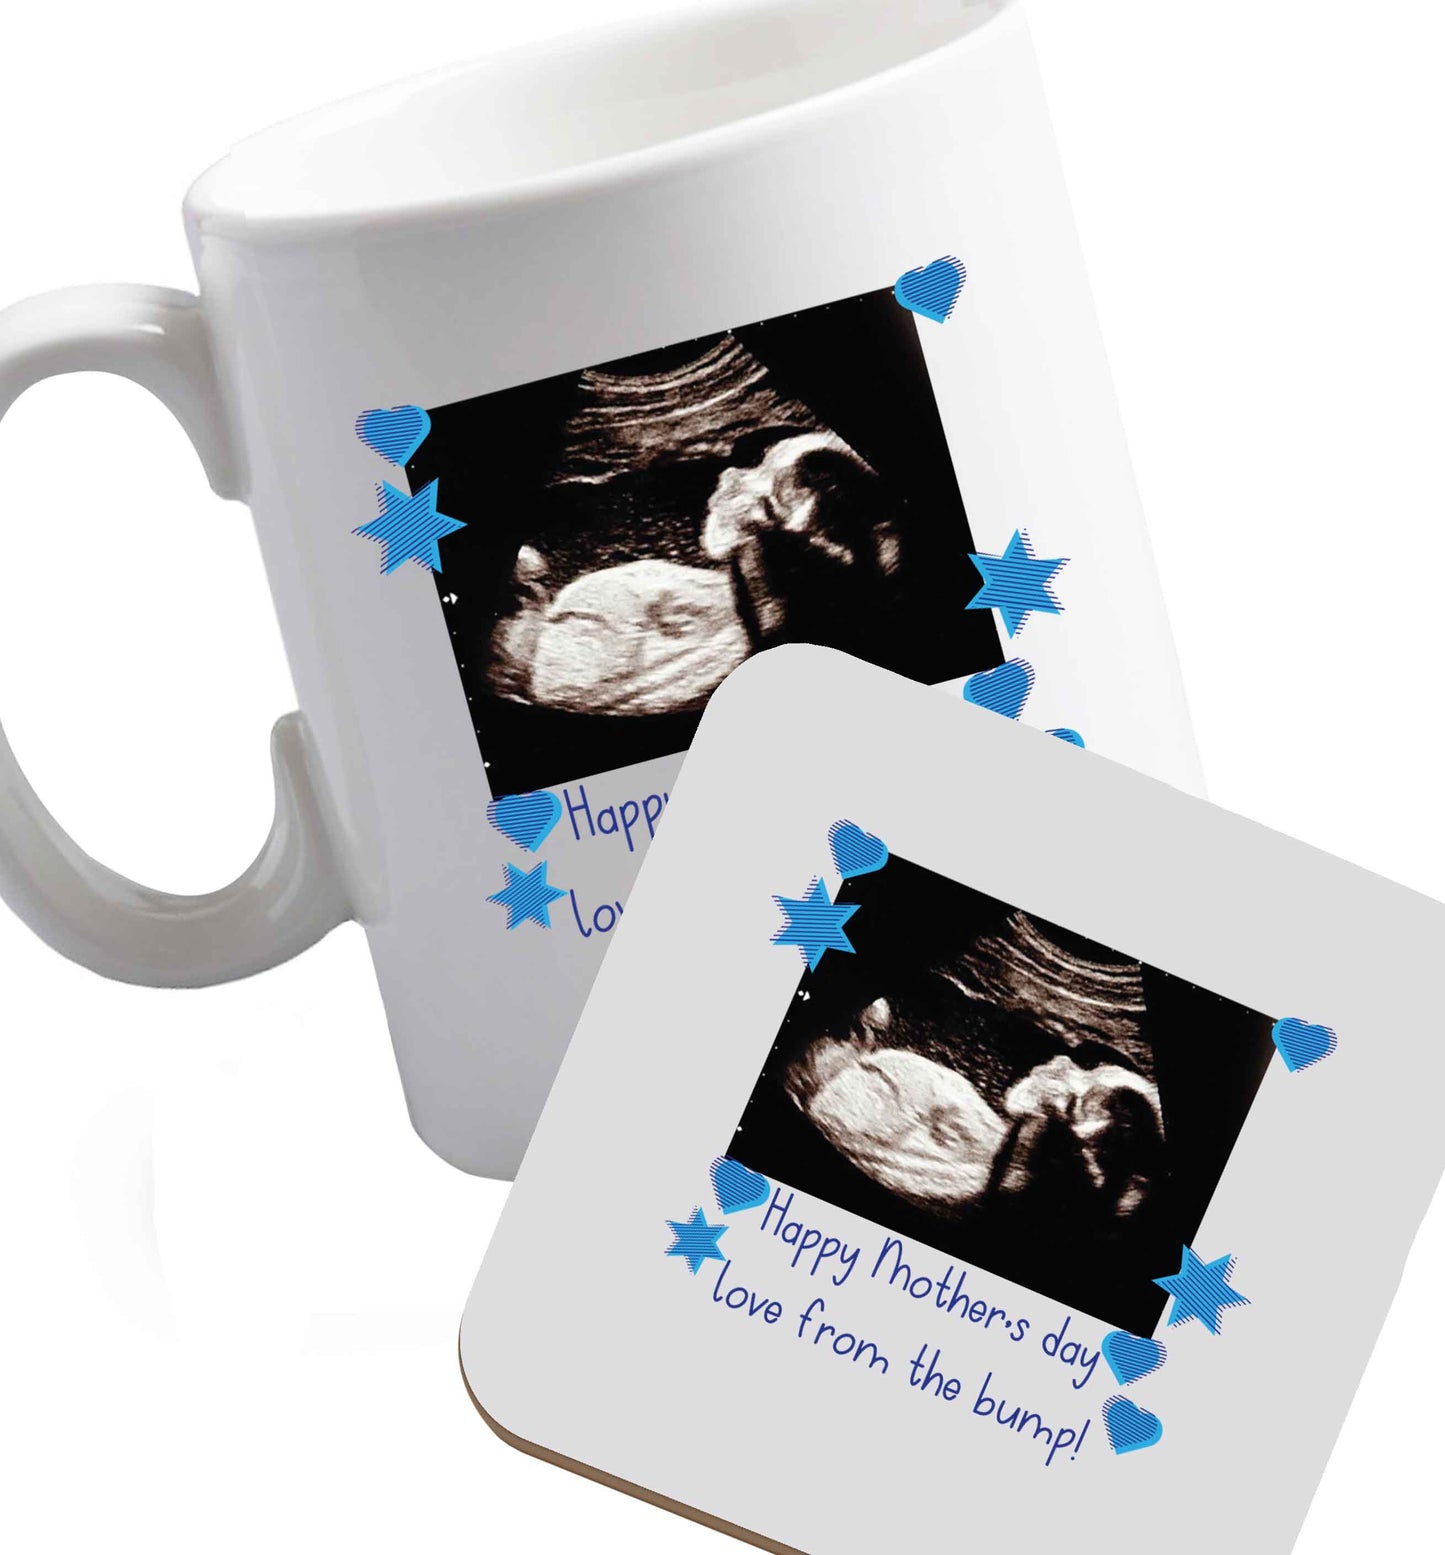 10 oz Happy Mother's day love from the bump - blue ceramic mug and coaster set right handed